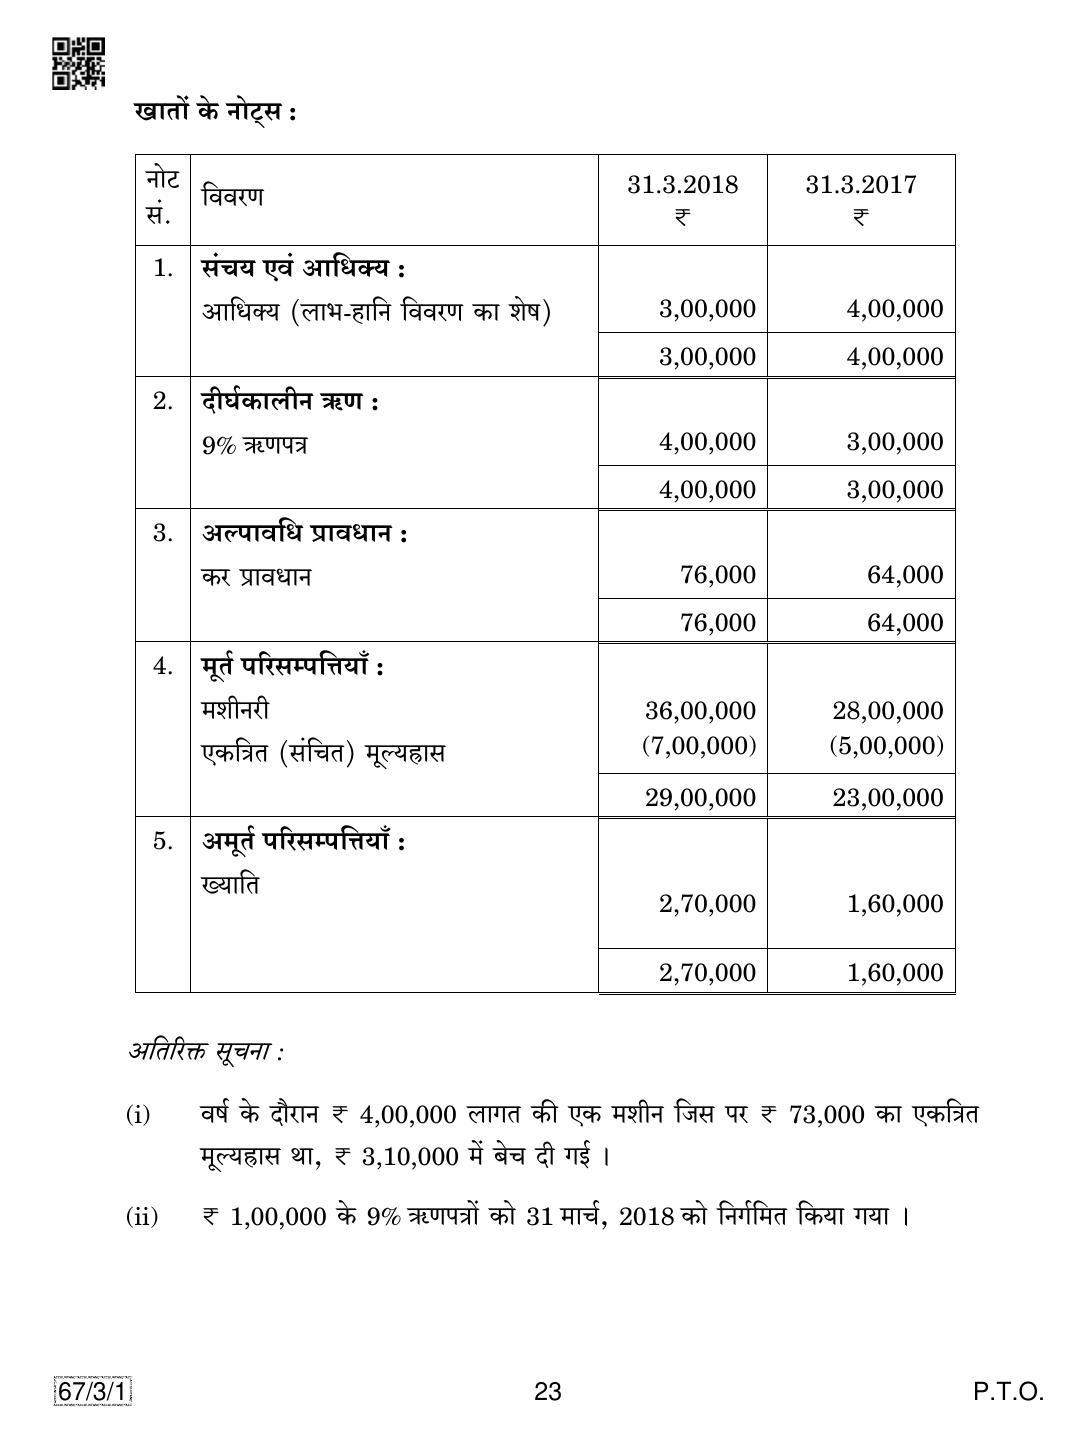 CBSE Class 12 67-3-1 Accountancy 2019 Question Paper - Page 23